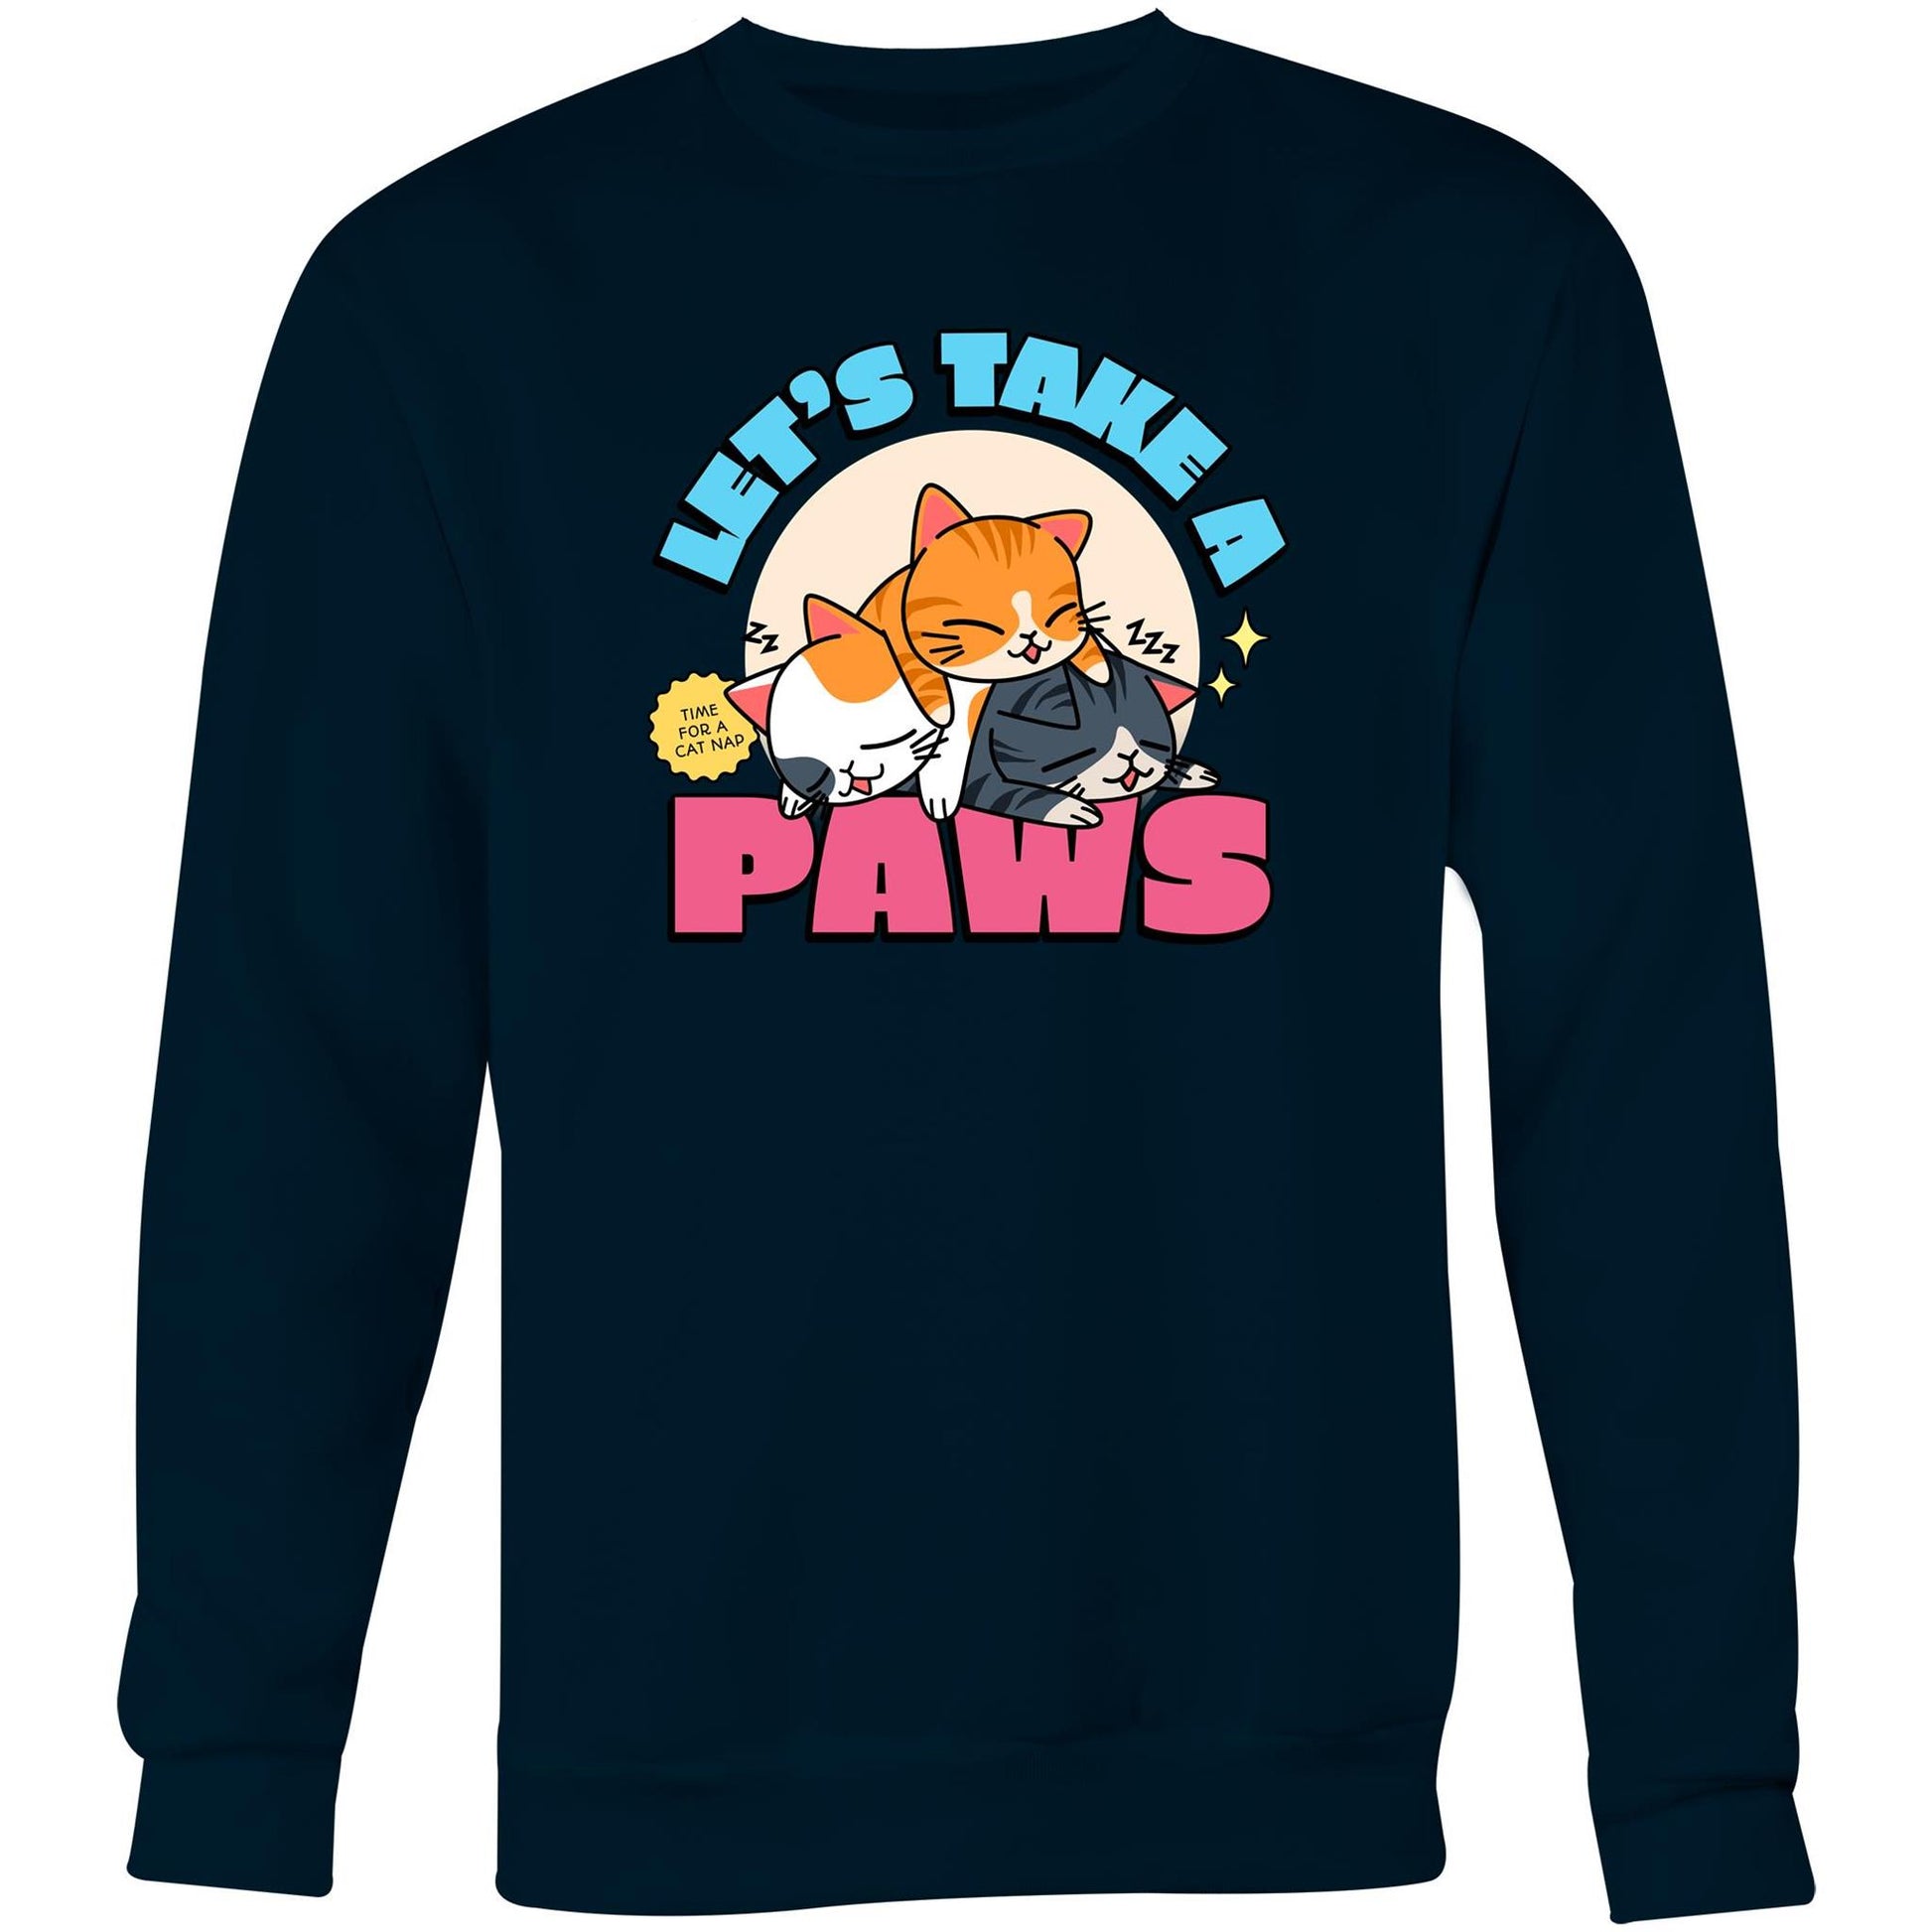 Let's Take A Paws, Time For A Cat Nap - Crew Sweatshirt Navy Sweatshirt animal